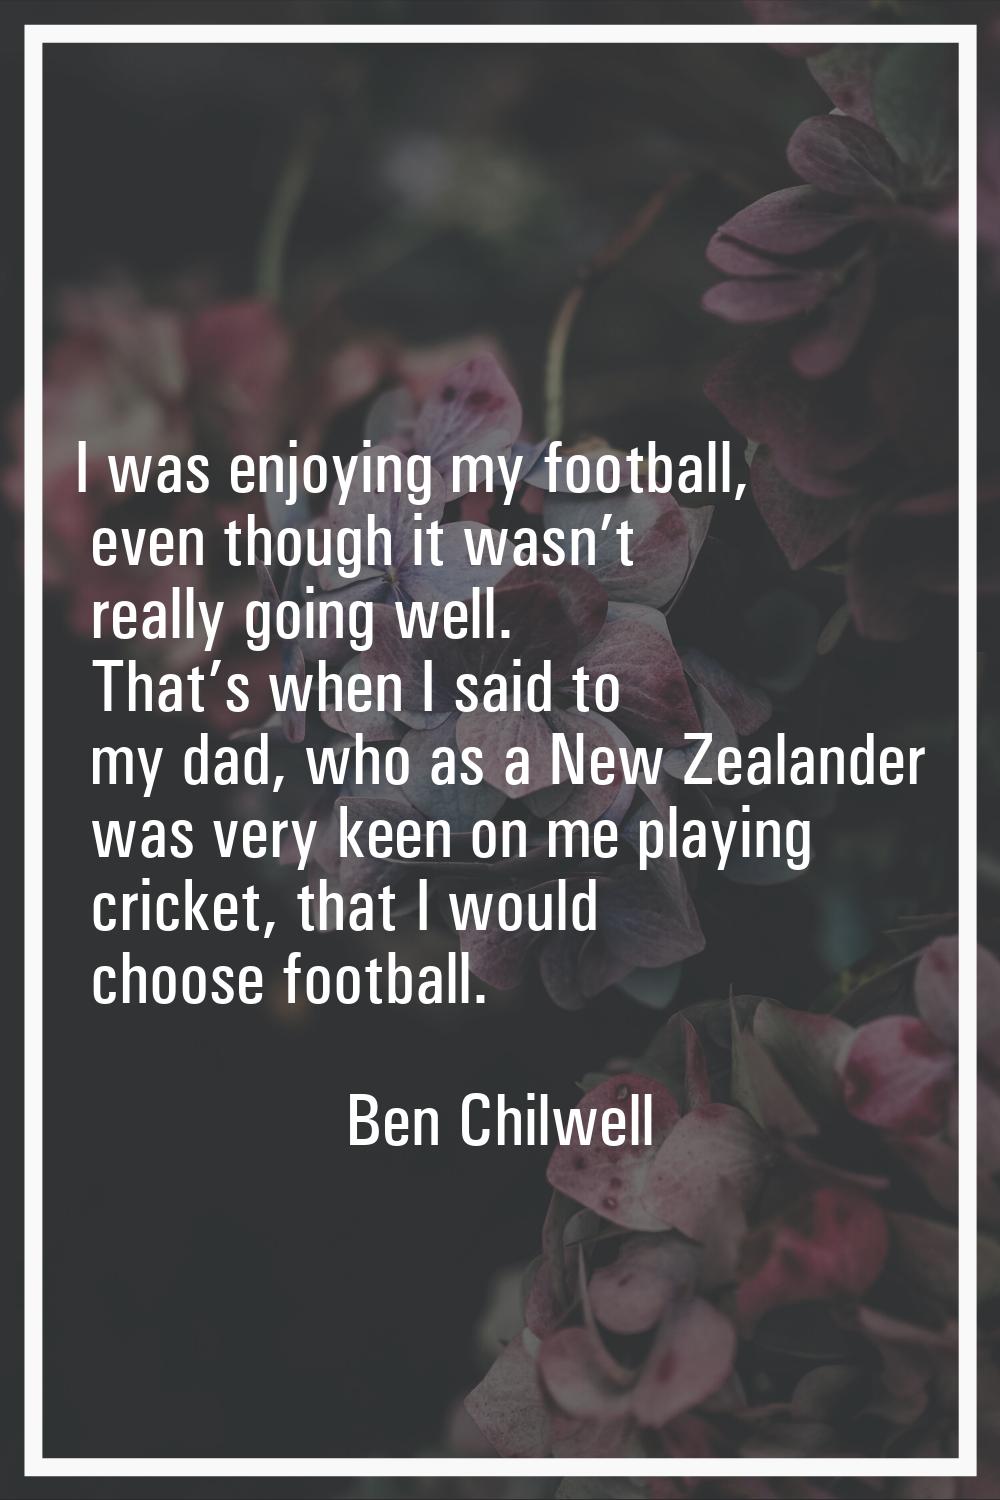 I was enjoying my football, even though it wasn’t really going well. That’s when I said to my dad, 